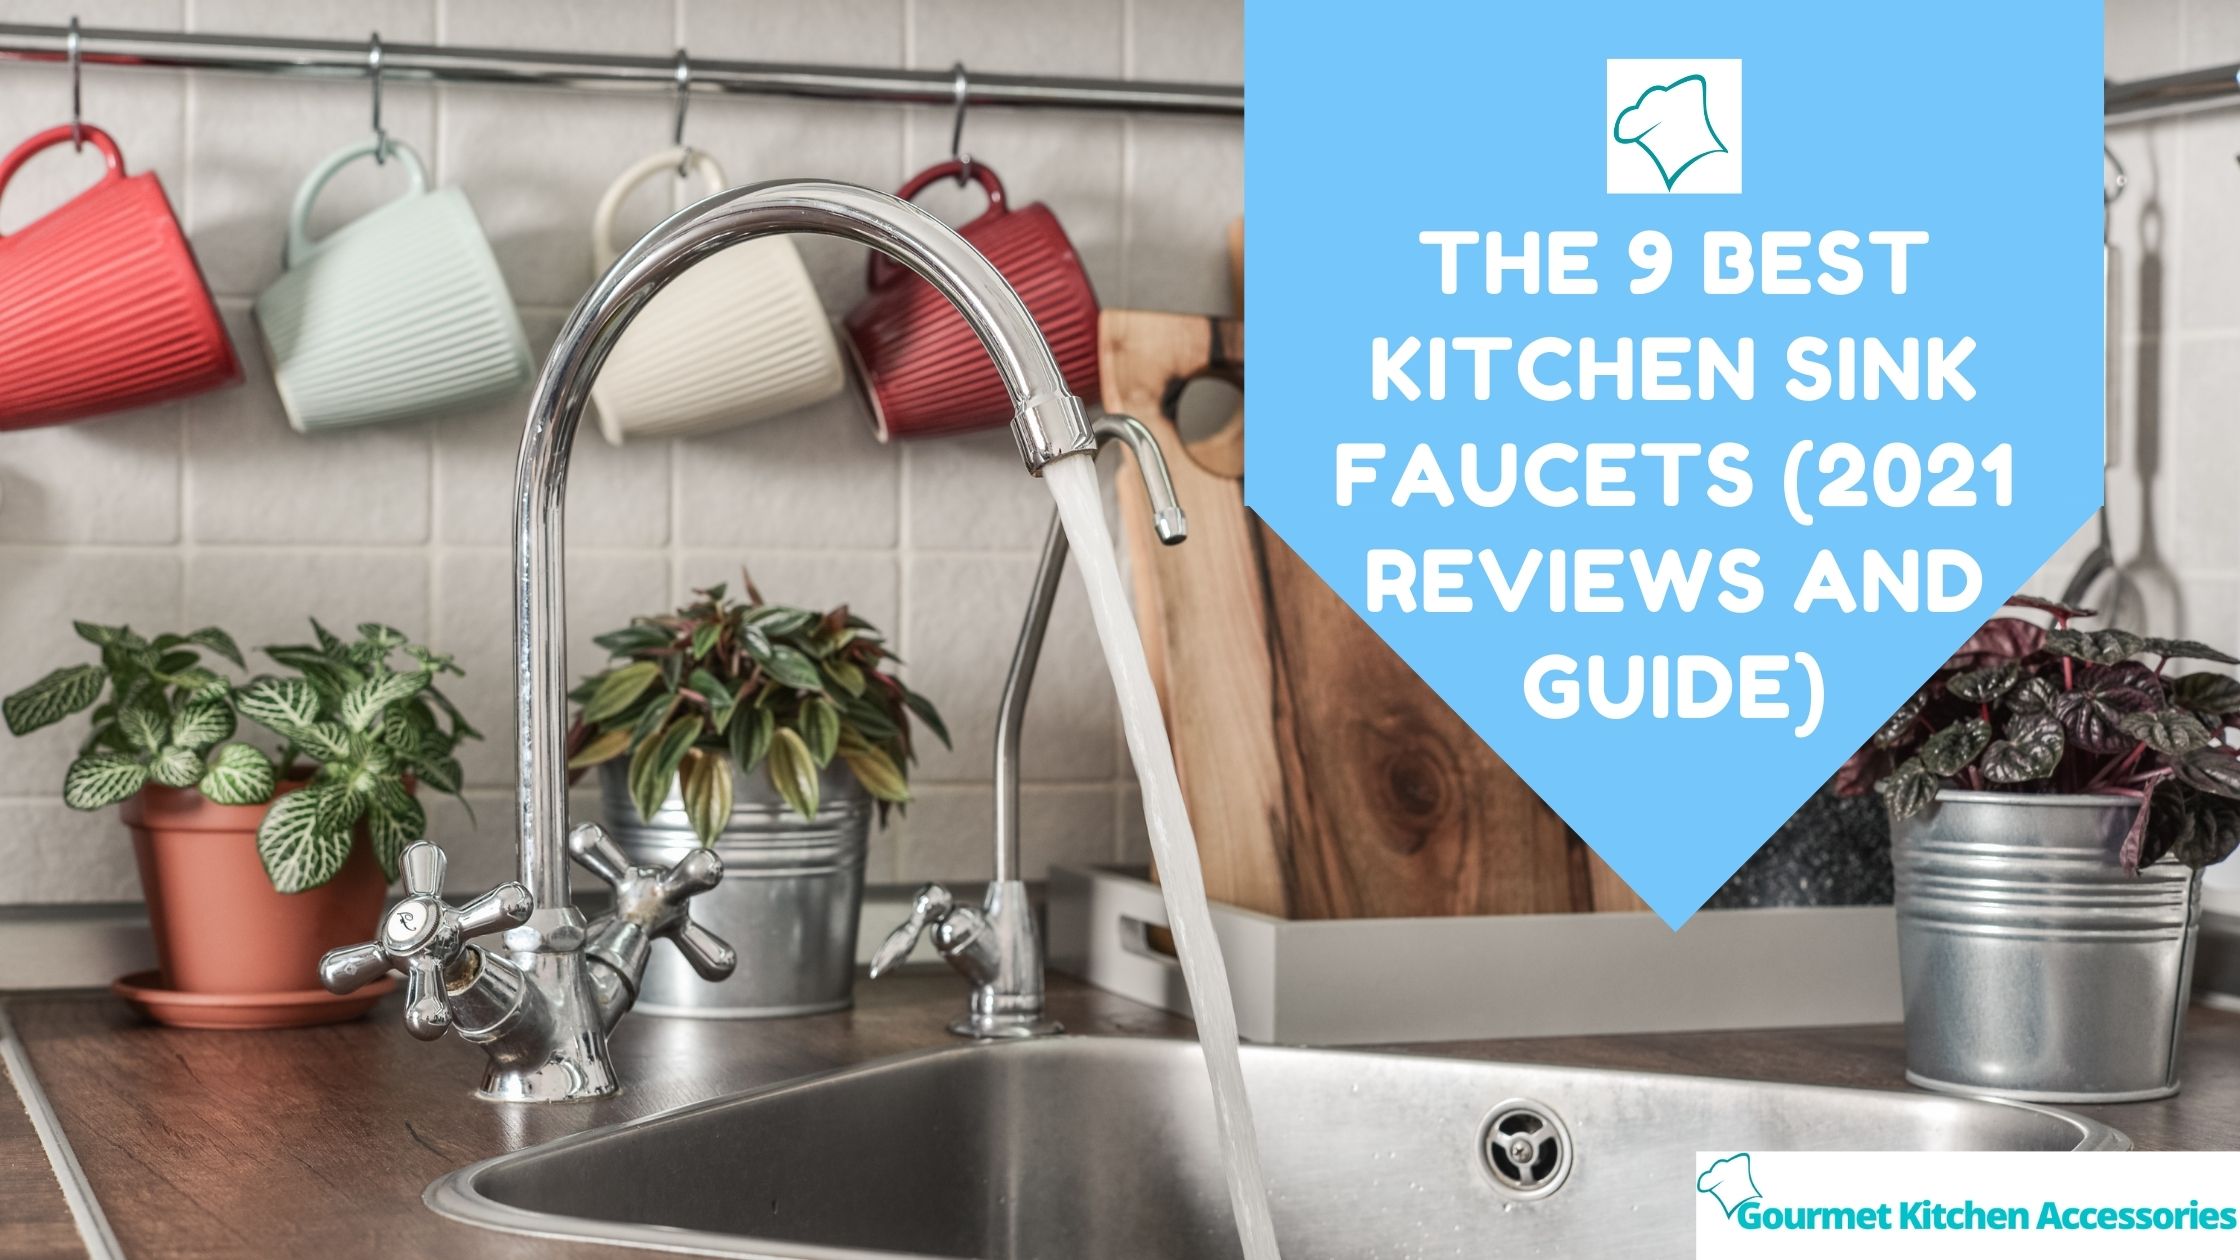 The 9 Best Kitchen Sink Faucets (2022 Reviews and Guide)